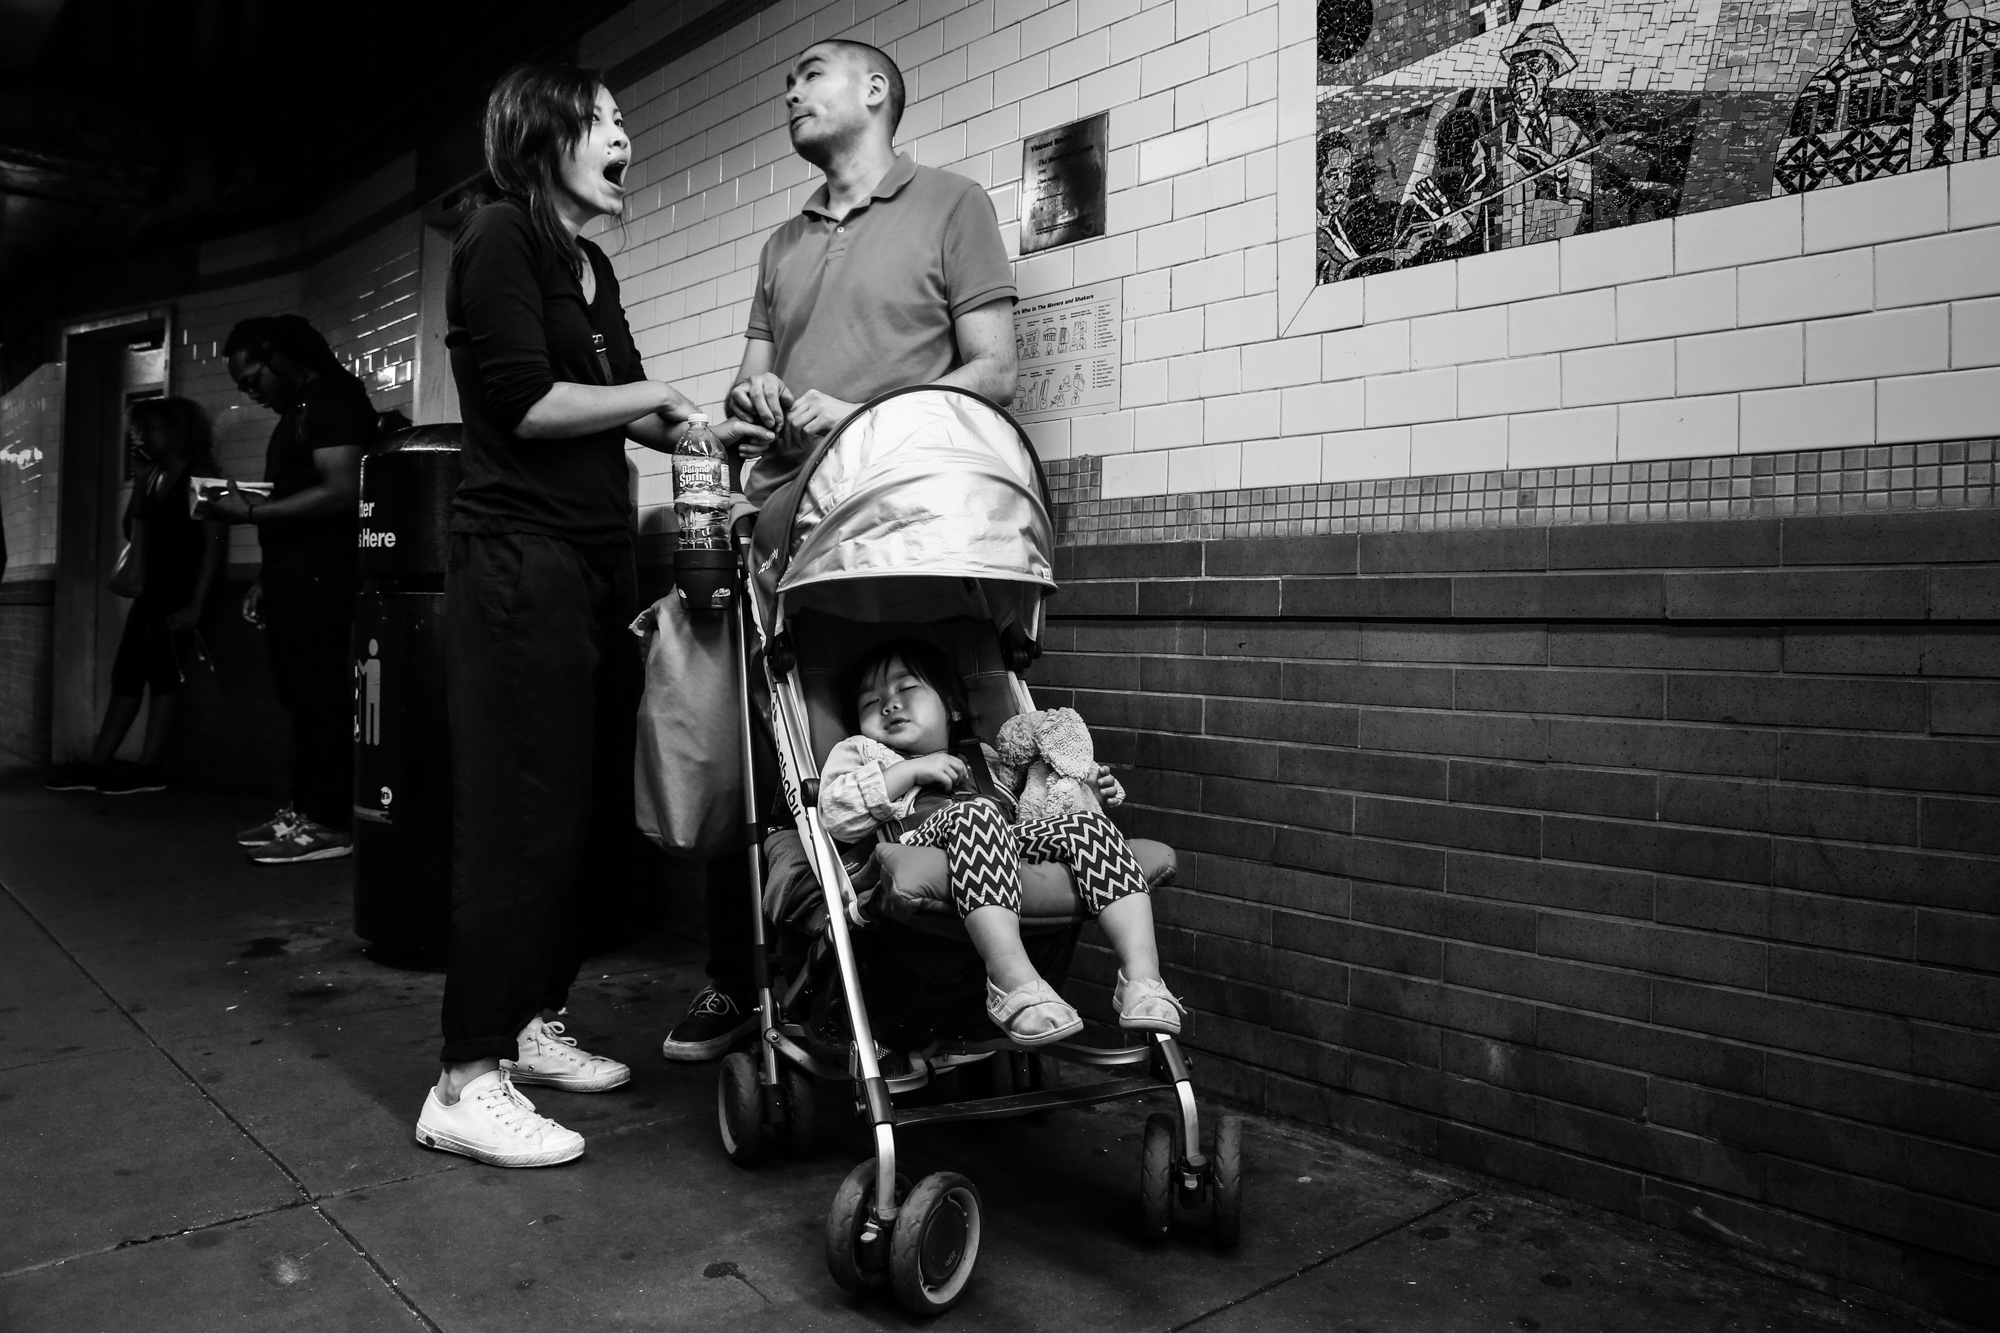 Girl sleeps in stroller while man stands and woman yawns